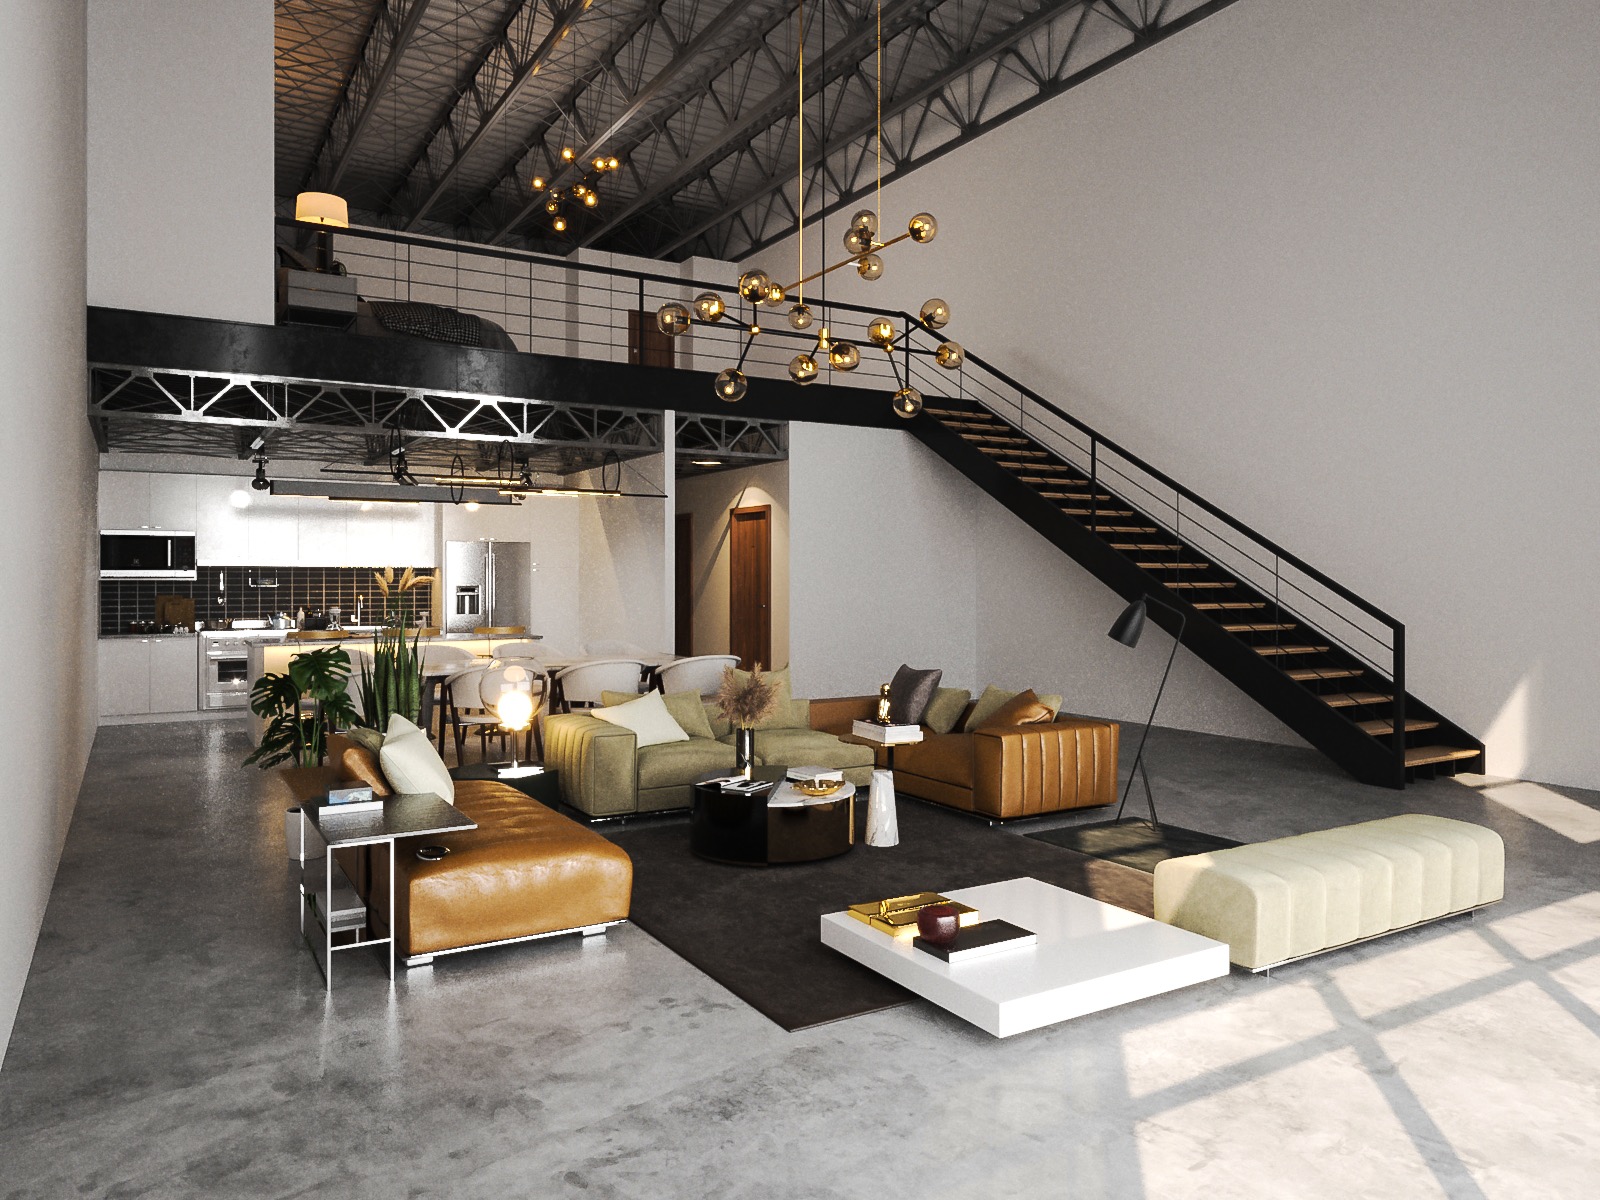 Living Space with Loft